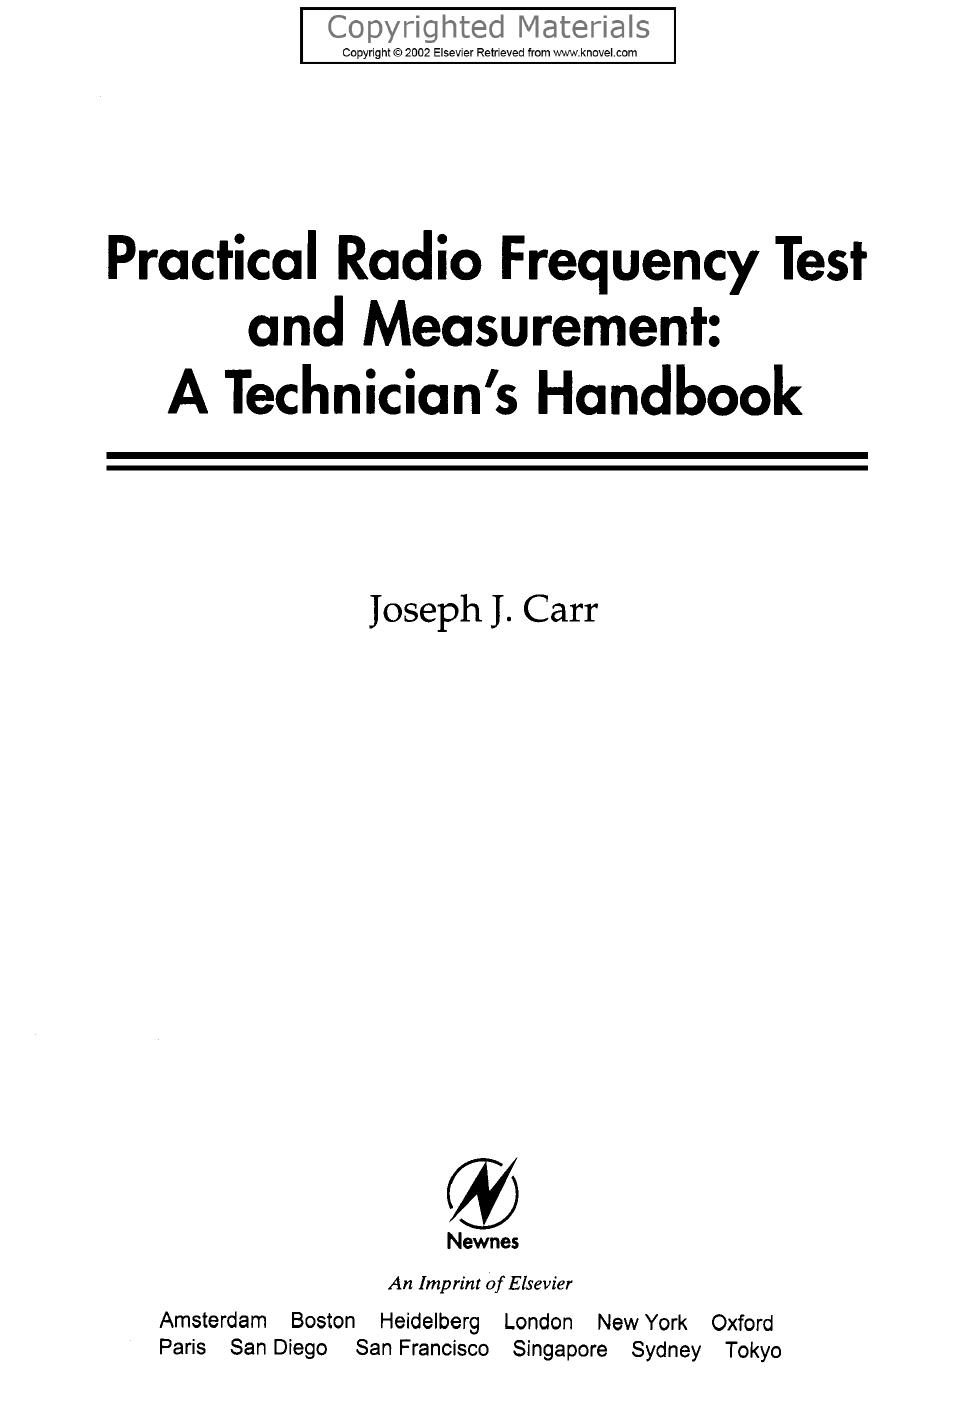 Carr - Practical Radio Frequency Test and Measurement by 4<8=8AB@0B>@